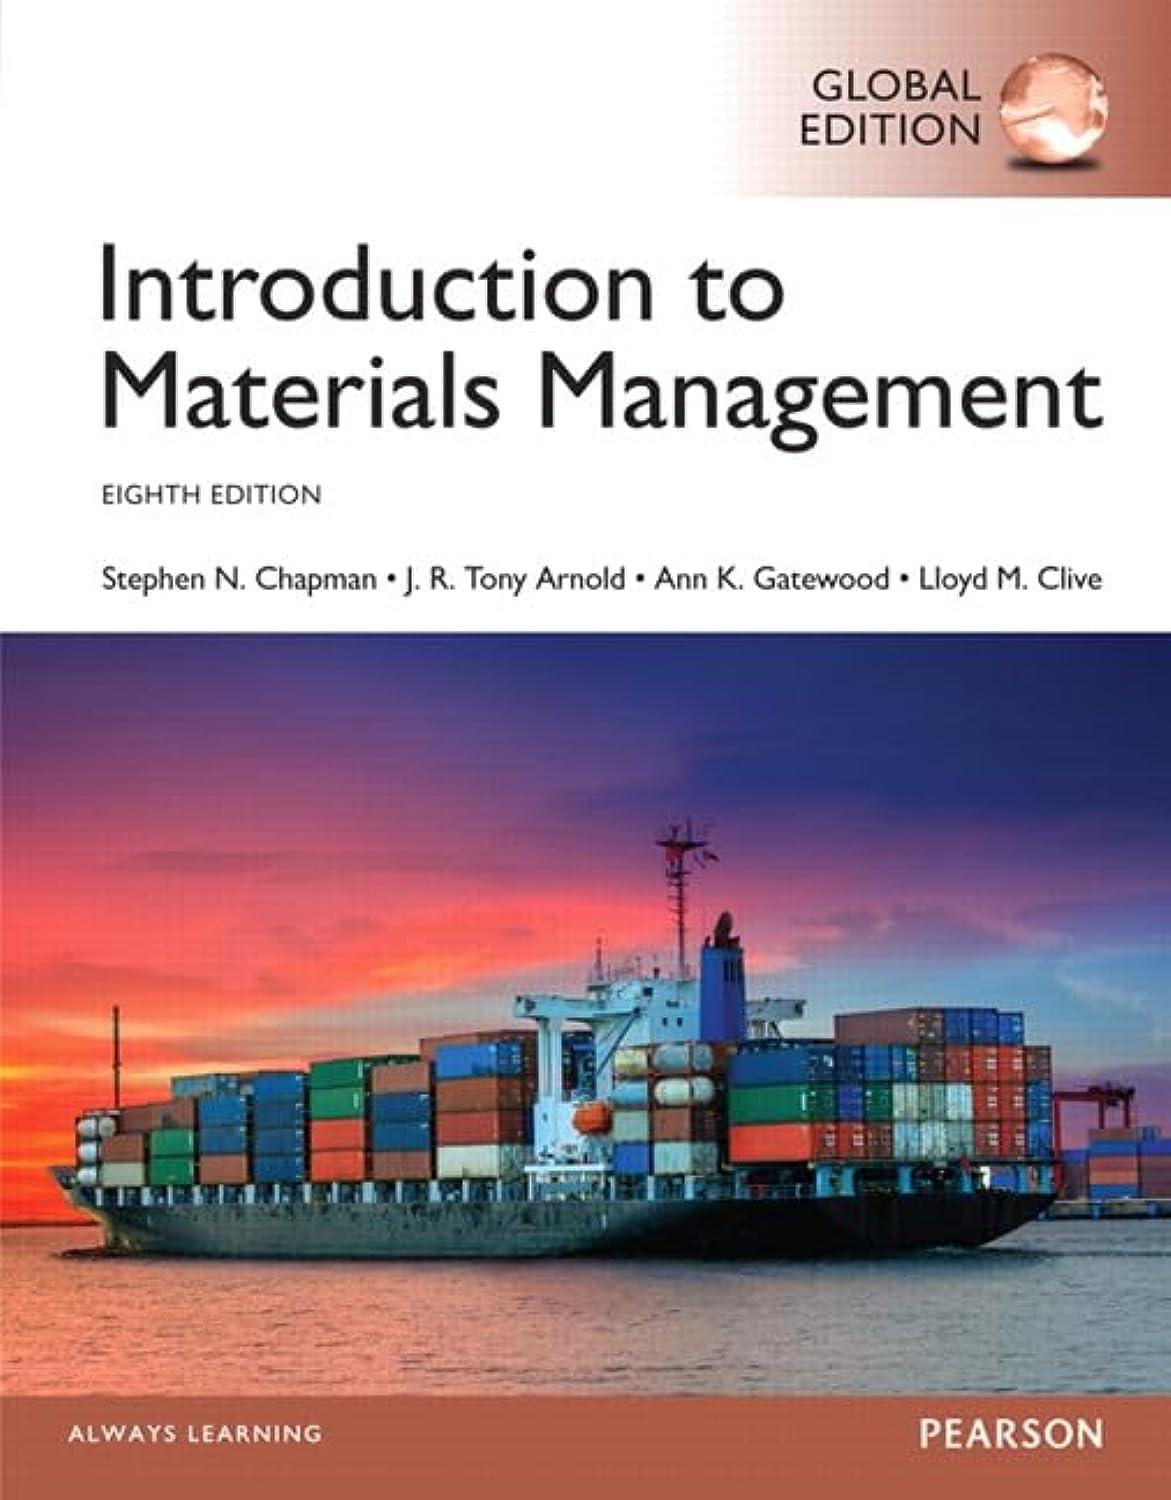 introduction to materials management 8th global edition j. r. tony arnold, chapman, stephen n., lloyd m.